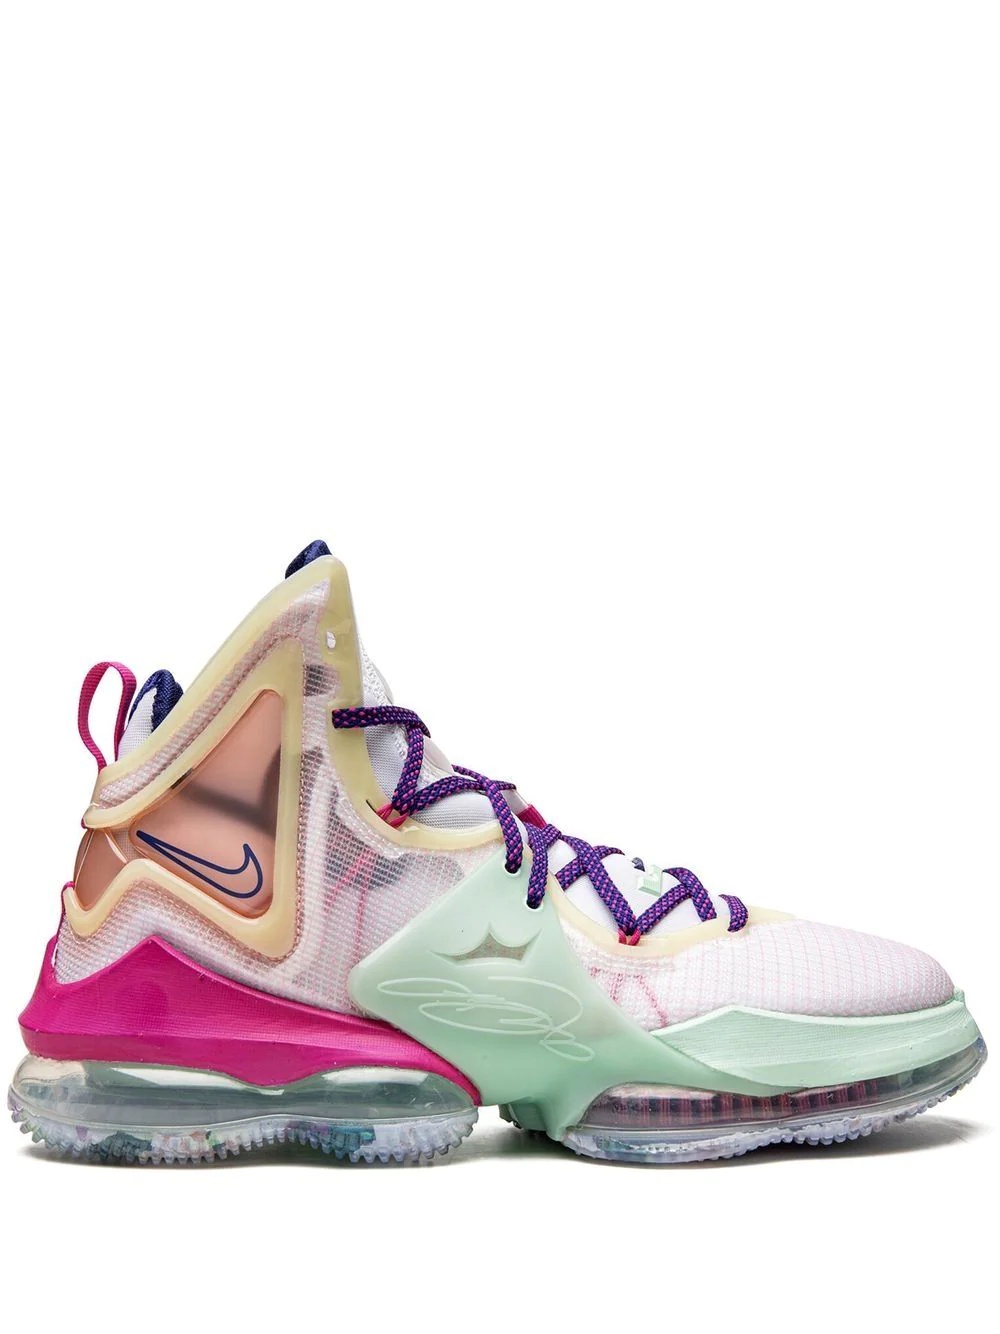 LeBron 19 "Valentine's Day" sneakers - 1